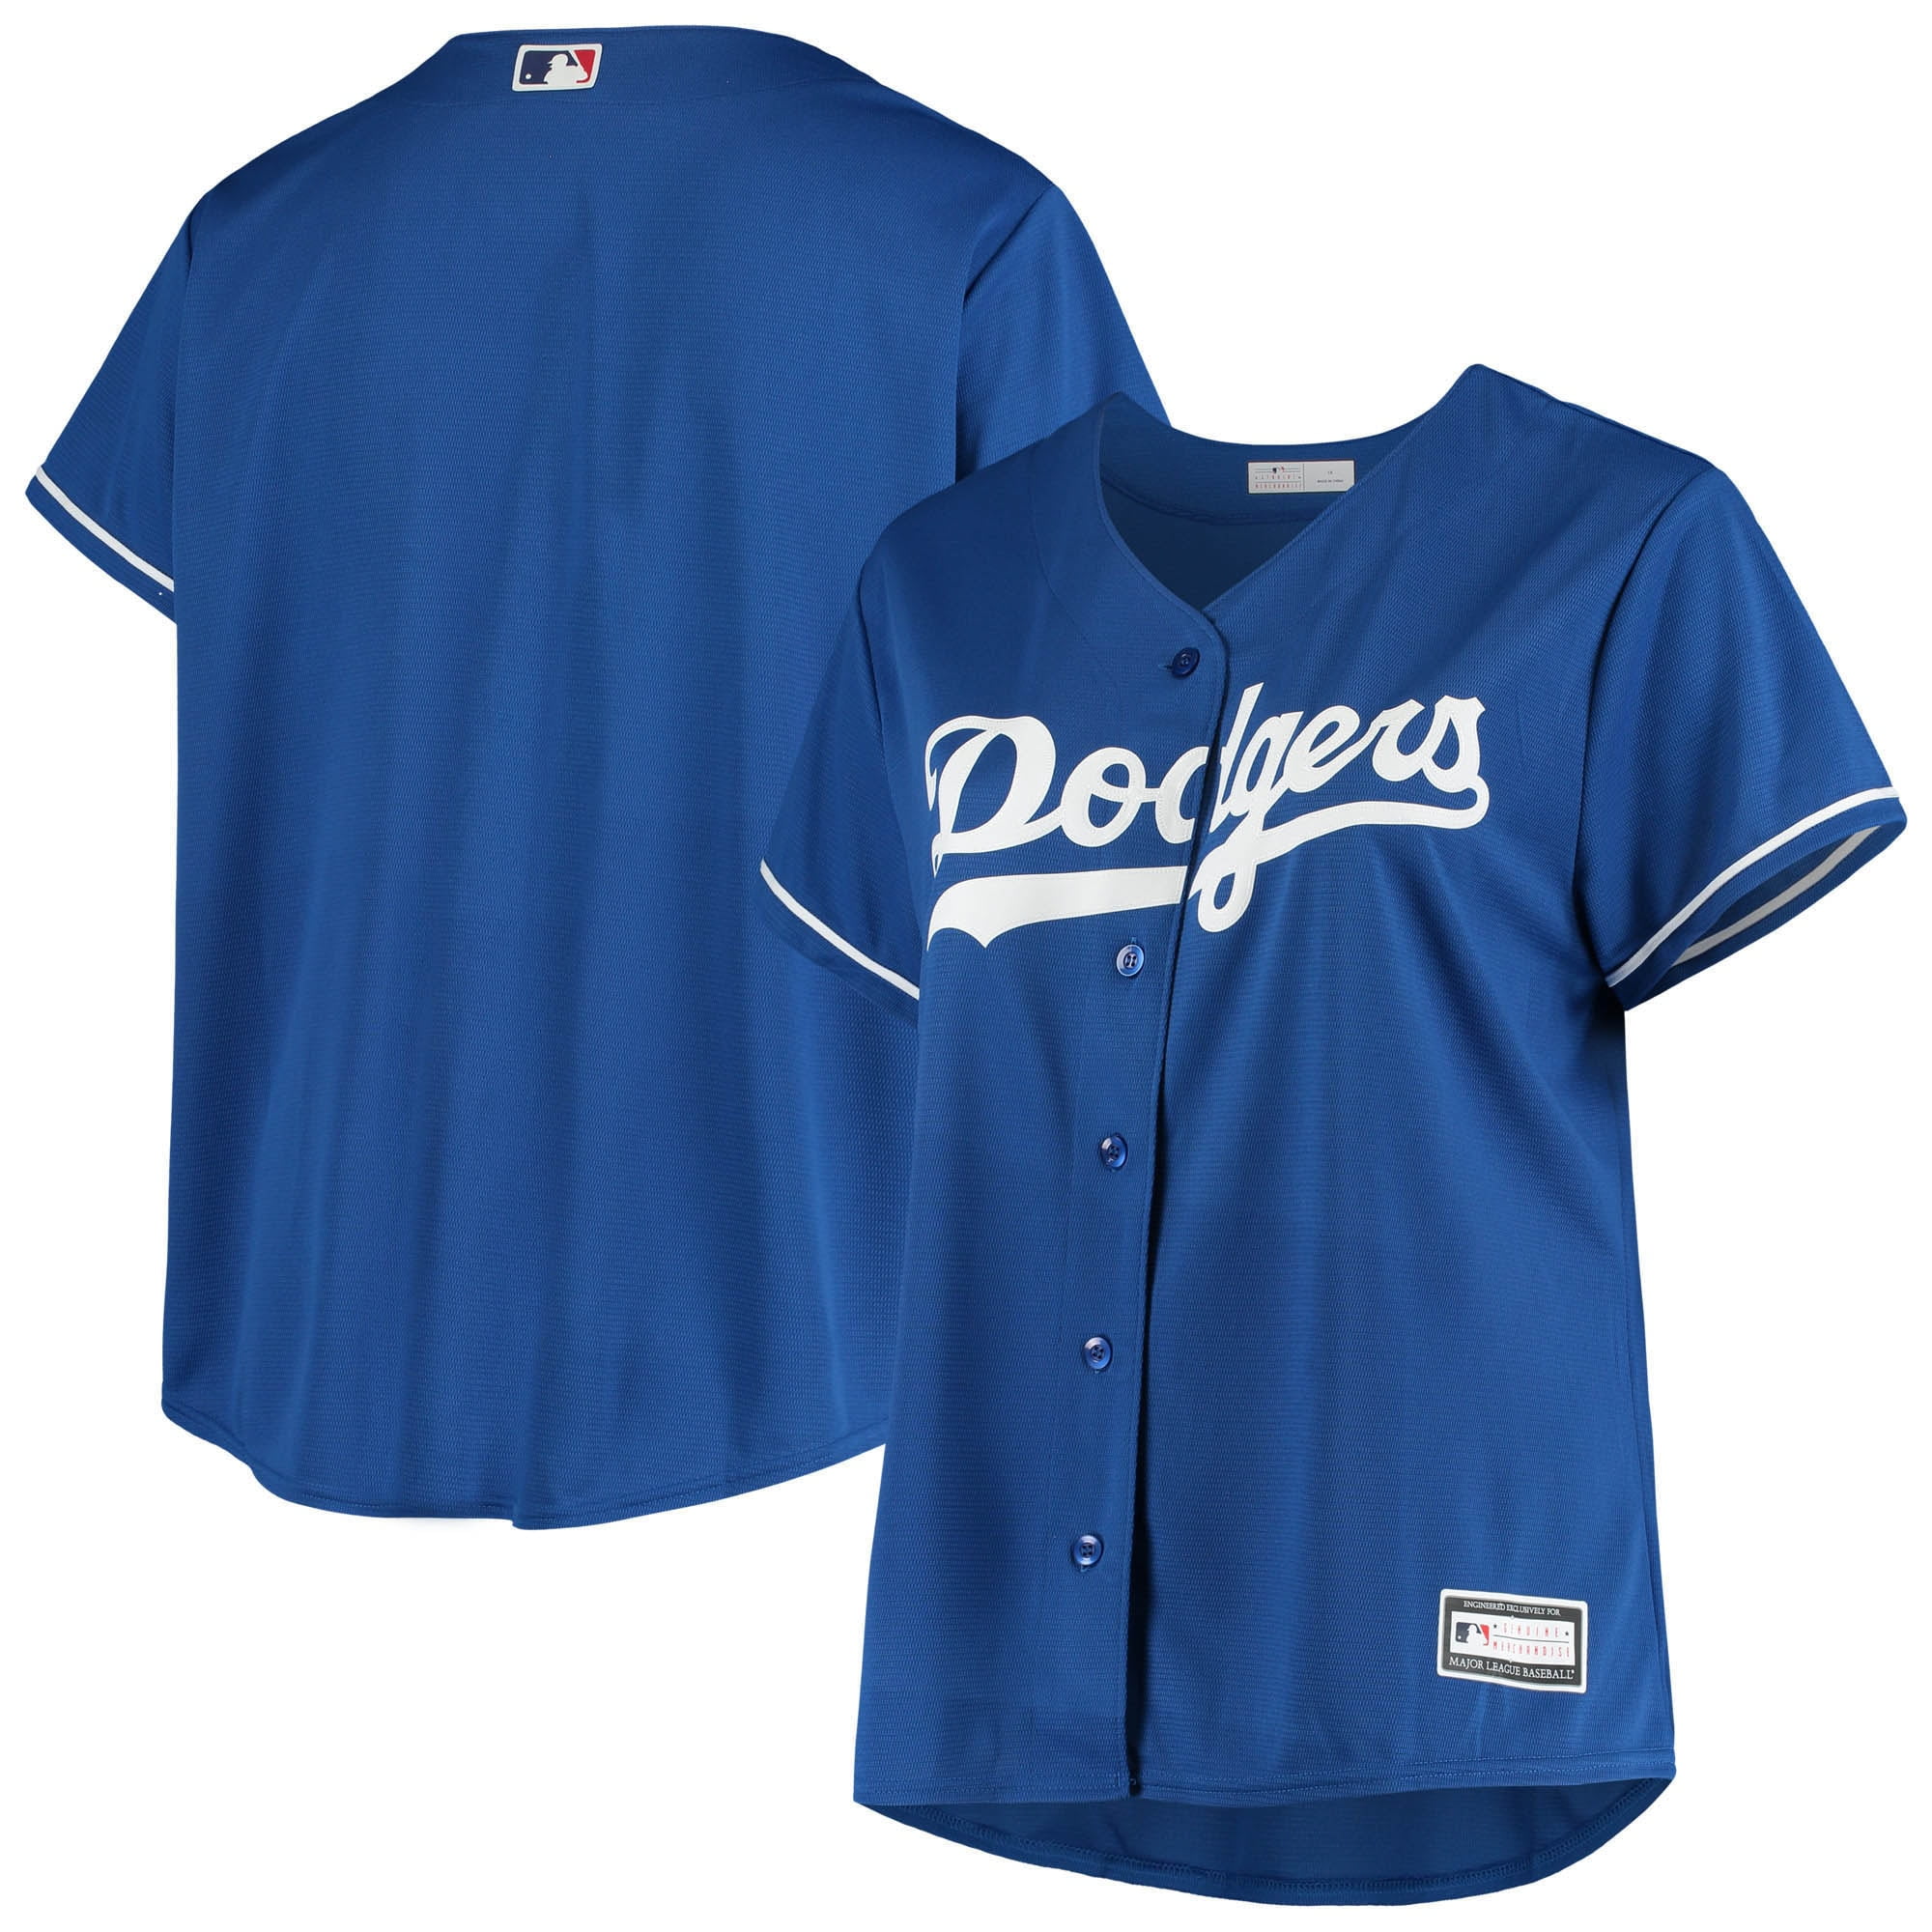  L.A. Dodgers Ladies Royal Blue MVP Jersey Tote Bag [Misc.] :  Sports & Outdoors